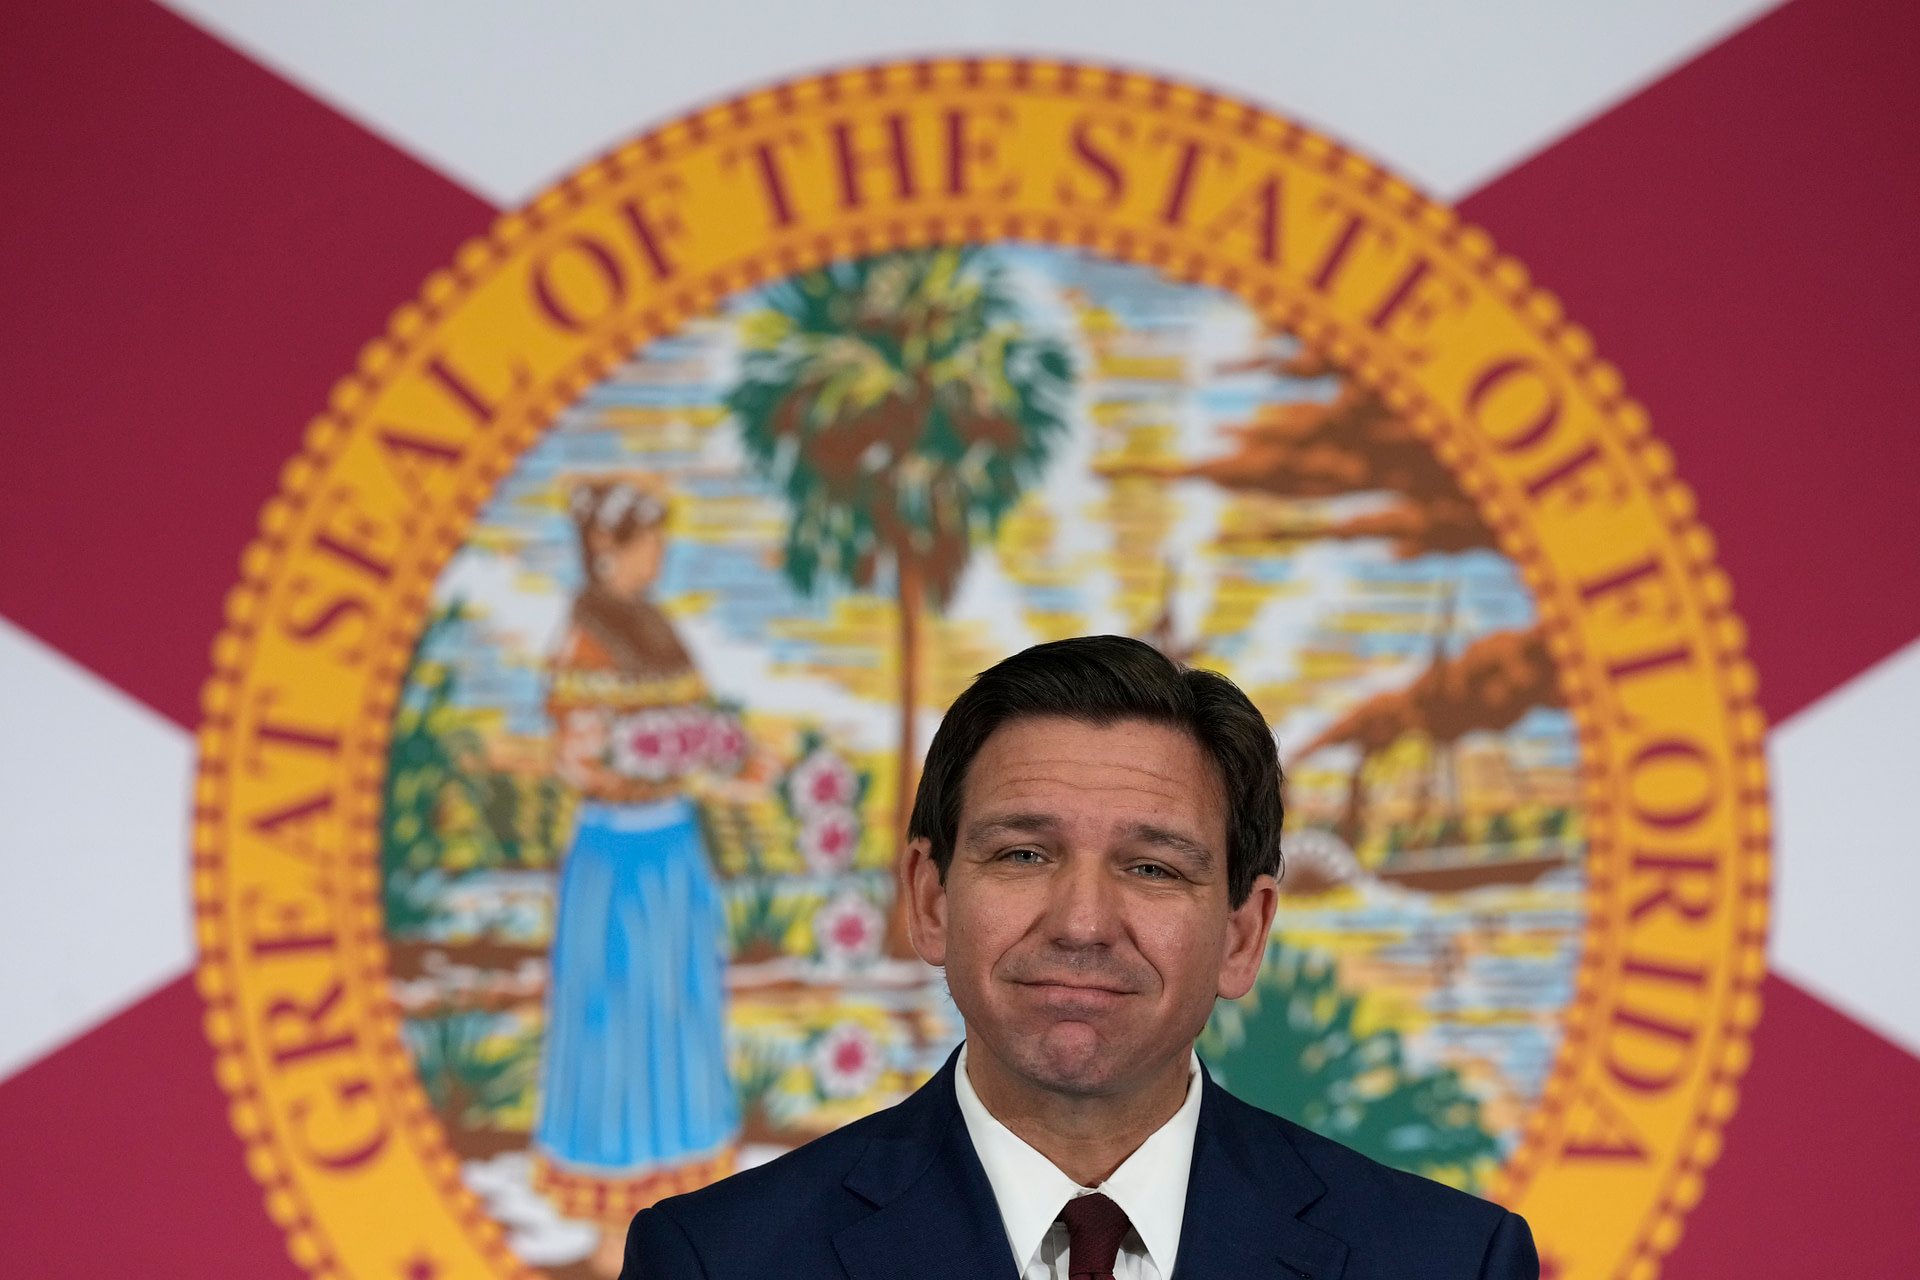 DeSantis stays mum on Trump, for now, after town hall